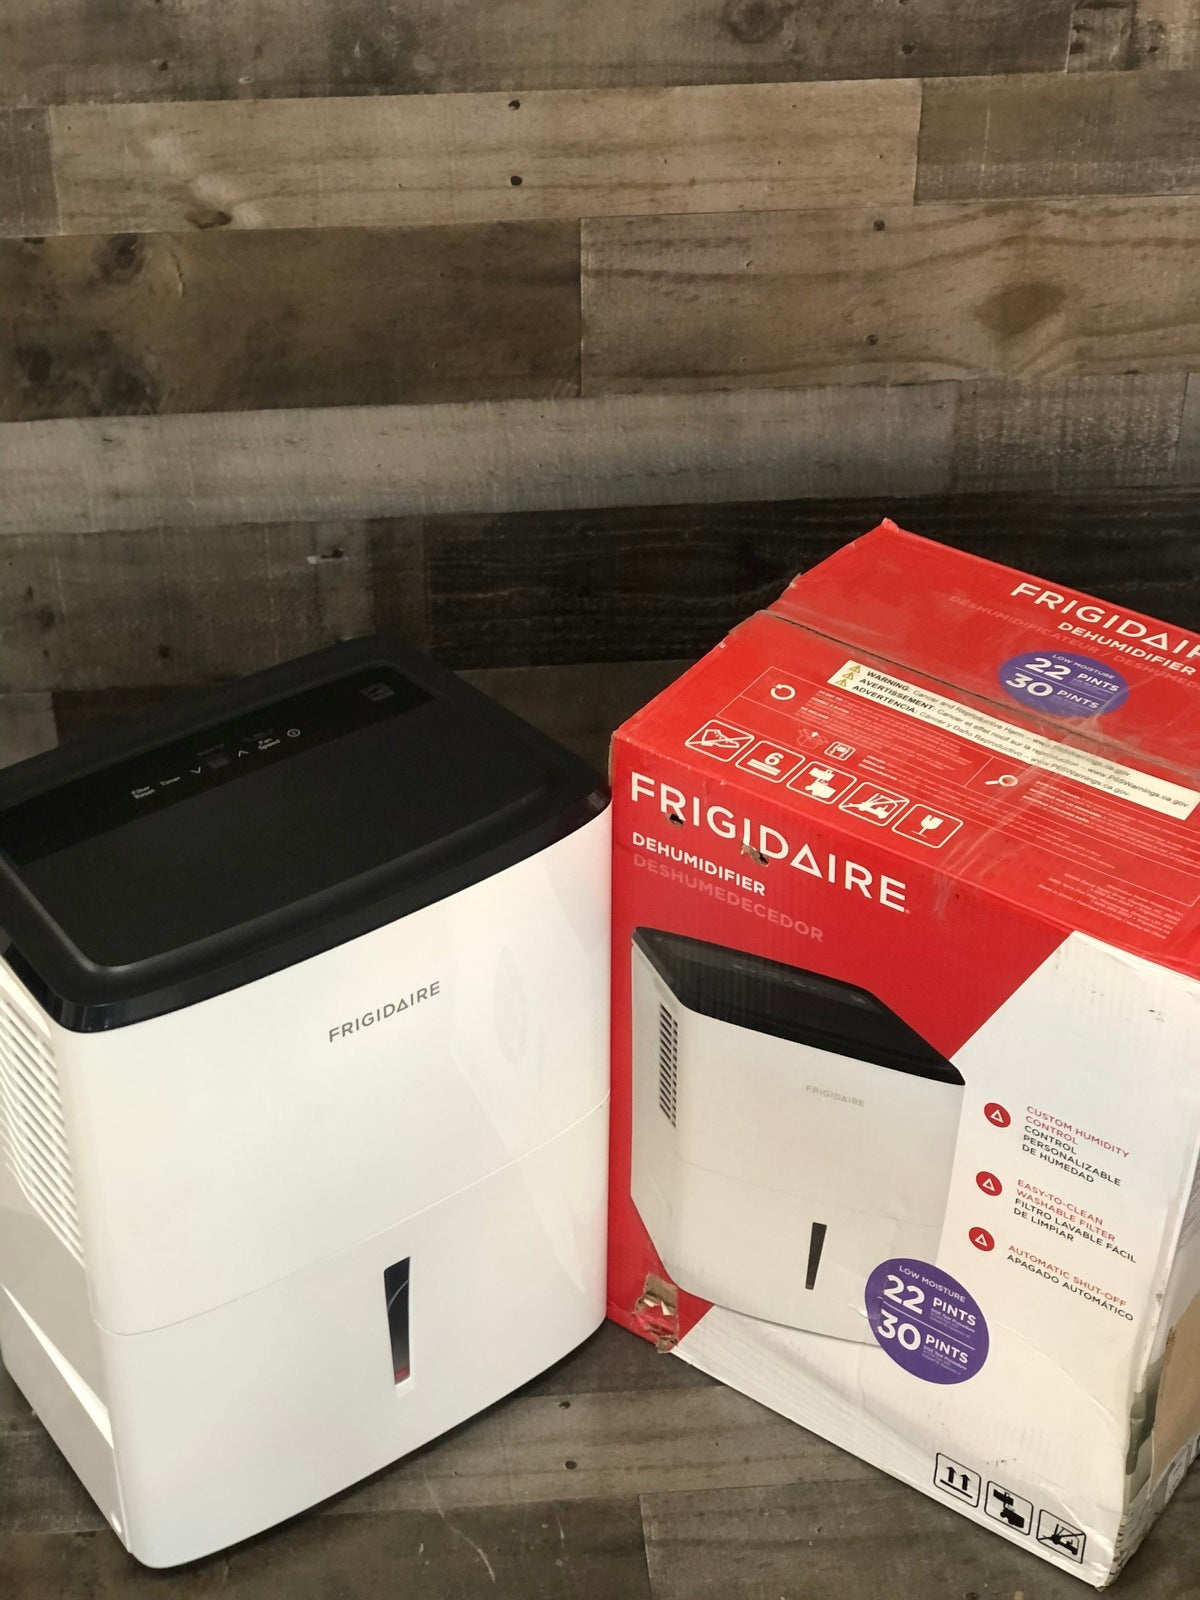 Frigidaire 50 Pint Dehumidifier with Pump. 4,500 Square Foot Coverage. Ideal for Large Rooms and Basements. 1.7 Gallon Bucket Capacity